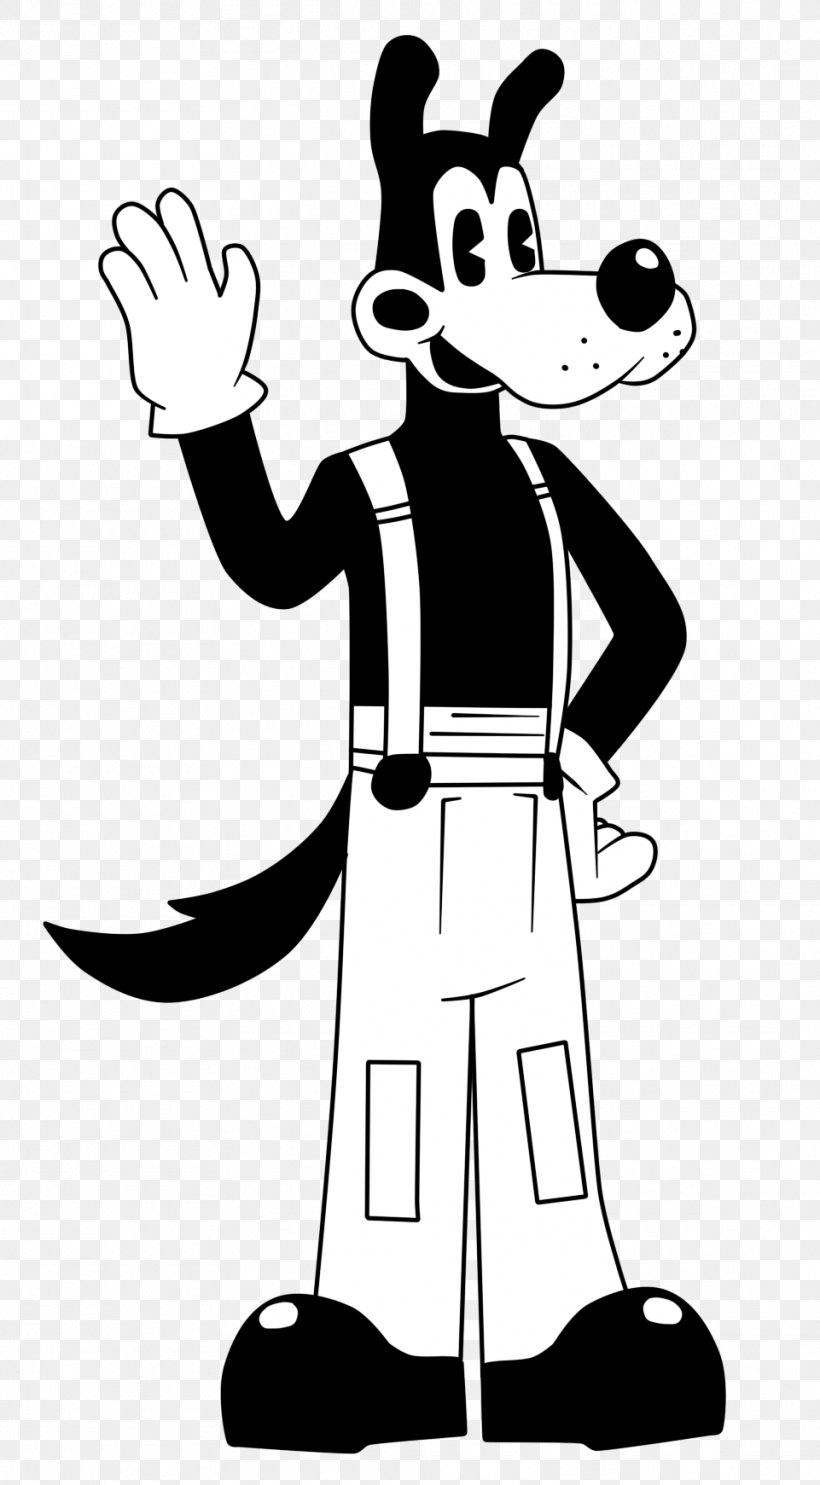 Clip Art Bendy And The Ink Machine Cartoon Line Art Illustration, PNG, 961x1741px, Bendy And The Ink Machine, Art, Artwork, Black, Black And White Download Free